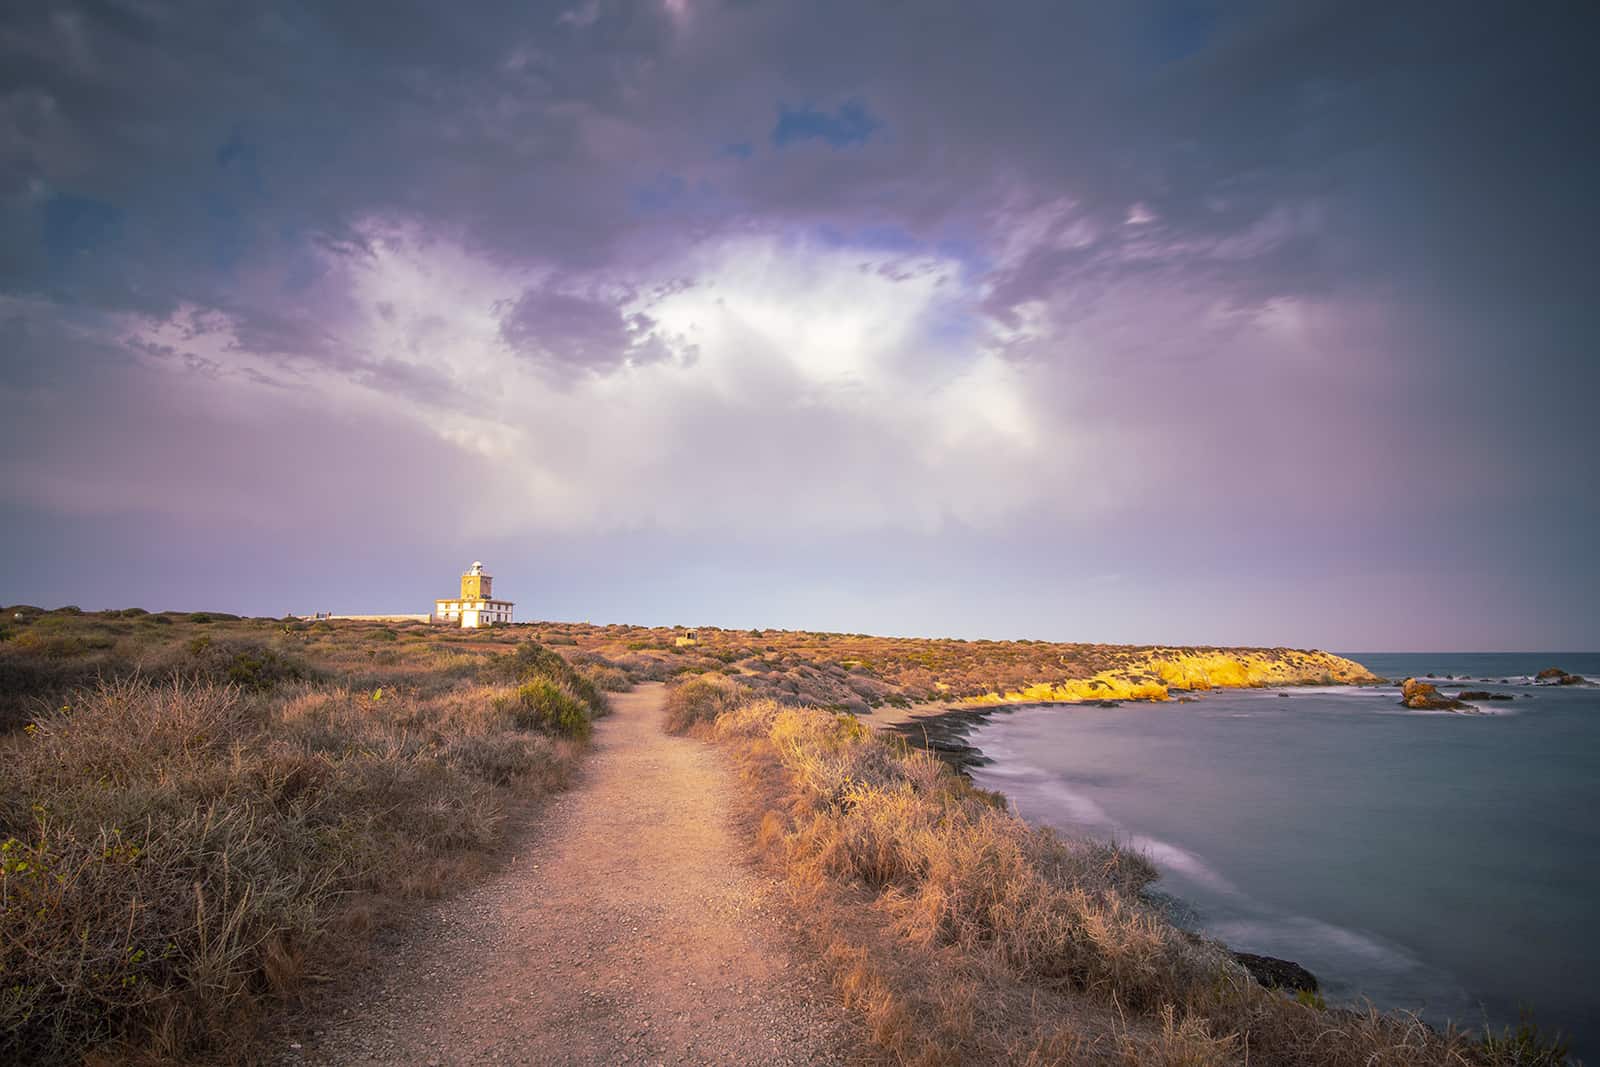 Tabarca island Alicante Spain on July 2020: Nova Tabarca is the largest island in the Valencian Community, and the smallest permanently inhabited islet in Spain. It is known for its marine reserve. The lighthouse by sunset.